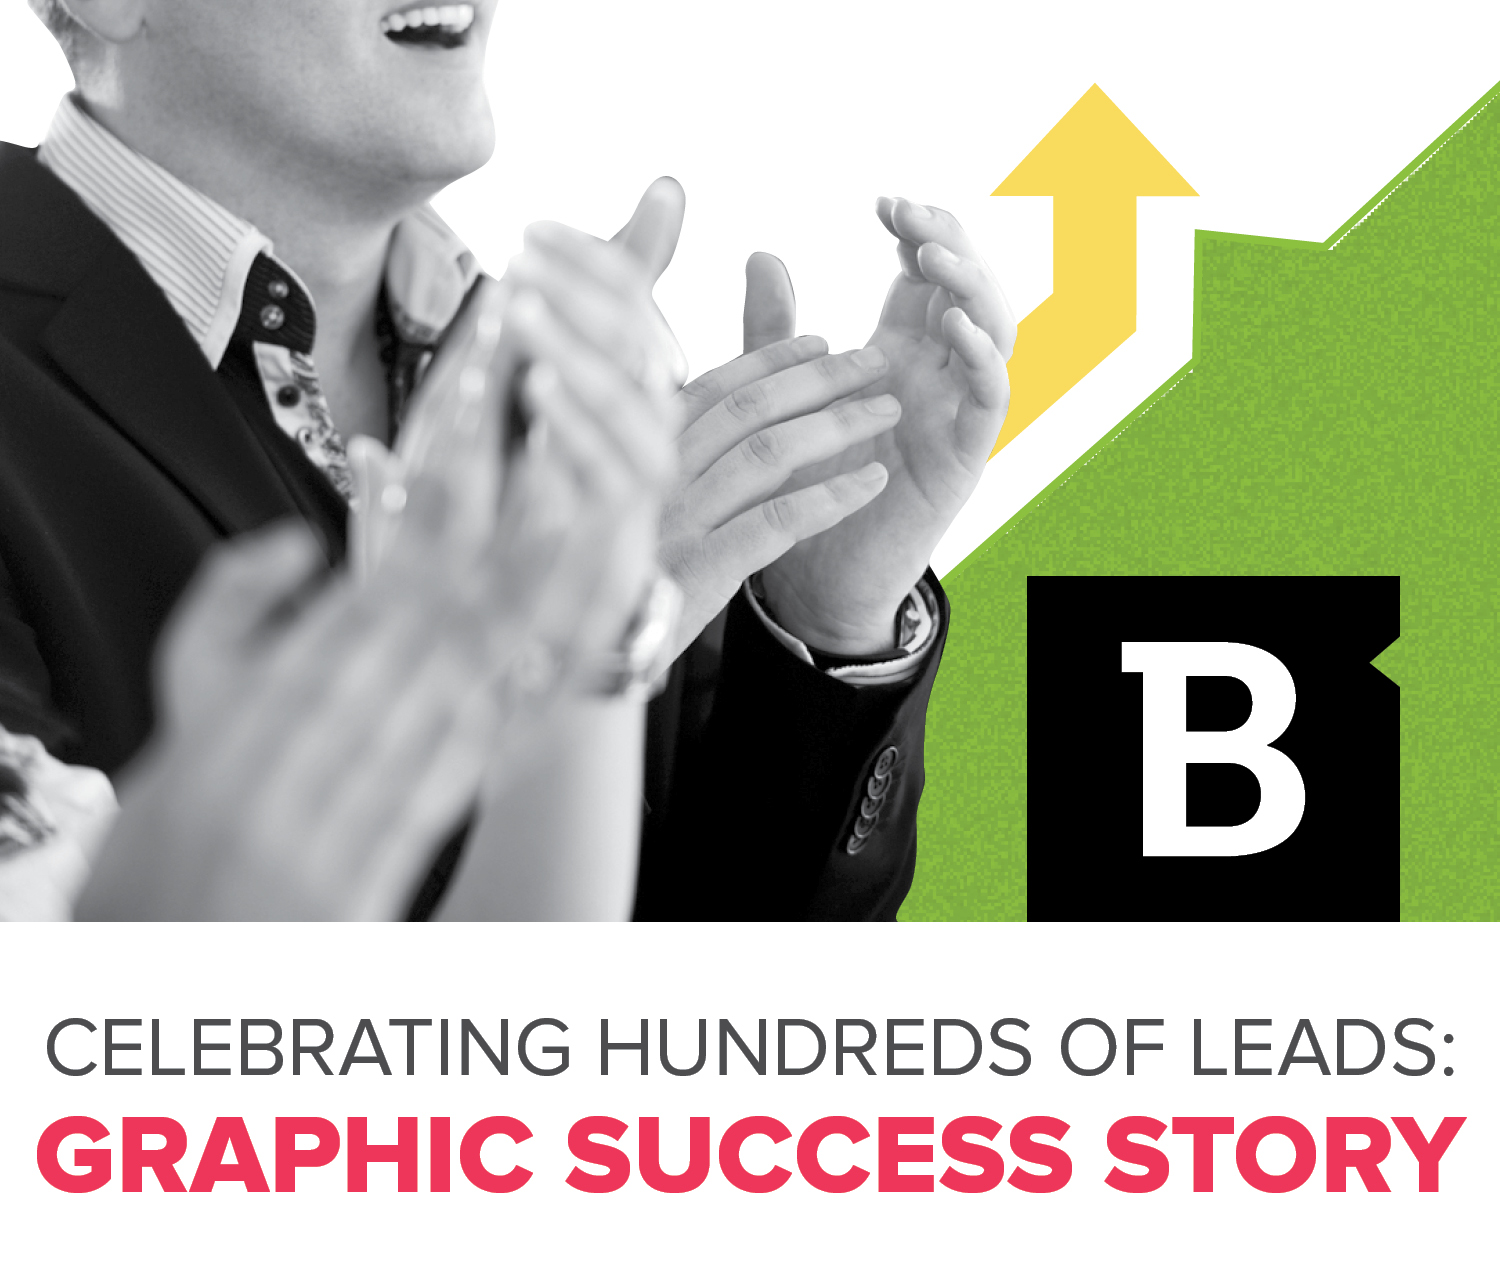 A company generates the most leads ever in a day when it promotes a custom infographic.